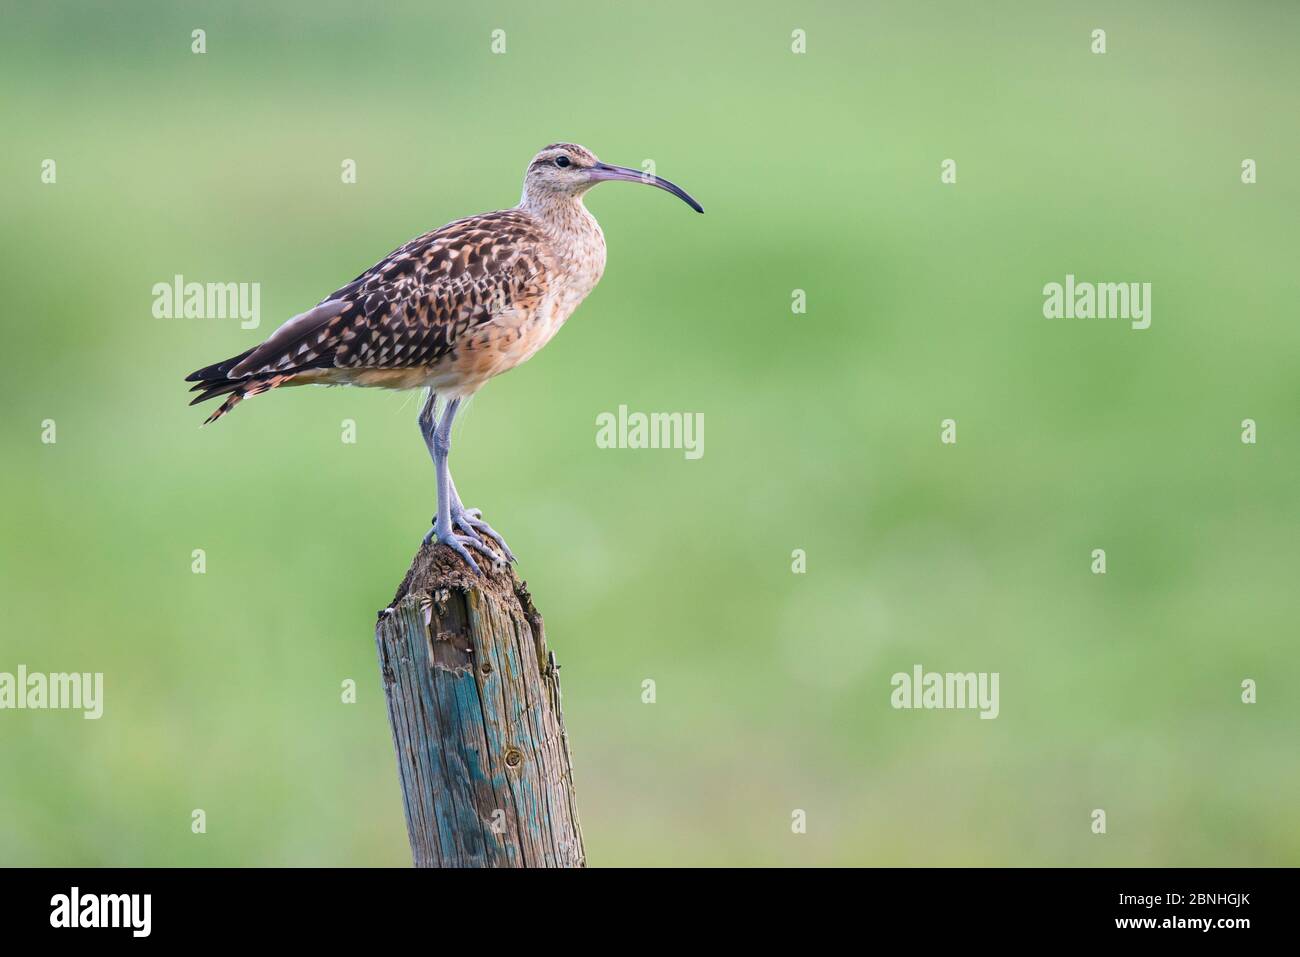 Bristle-thighed Curlew (Numenius tahitiensis) on wooden post, Oahu, Hawaii, January Stock Photo